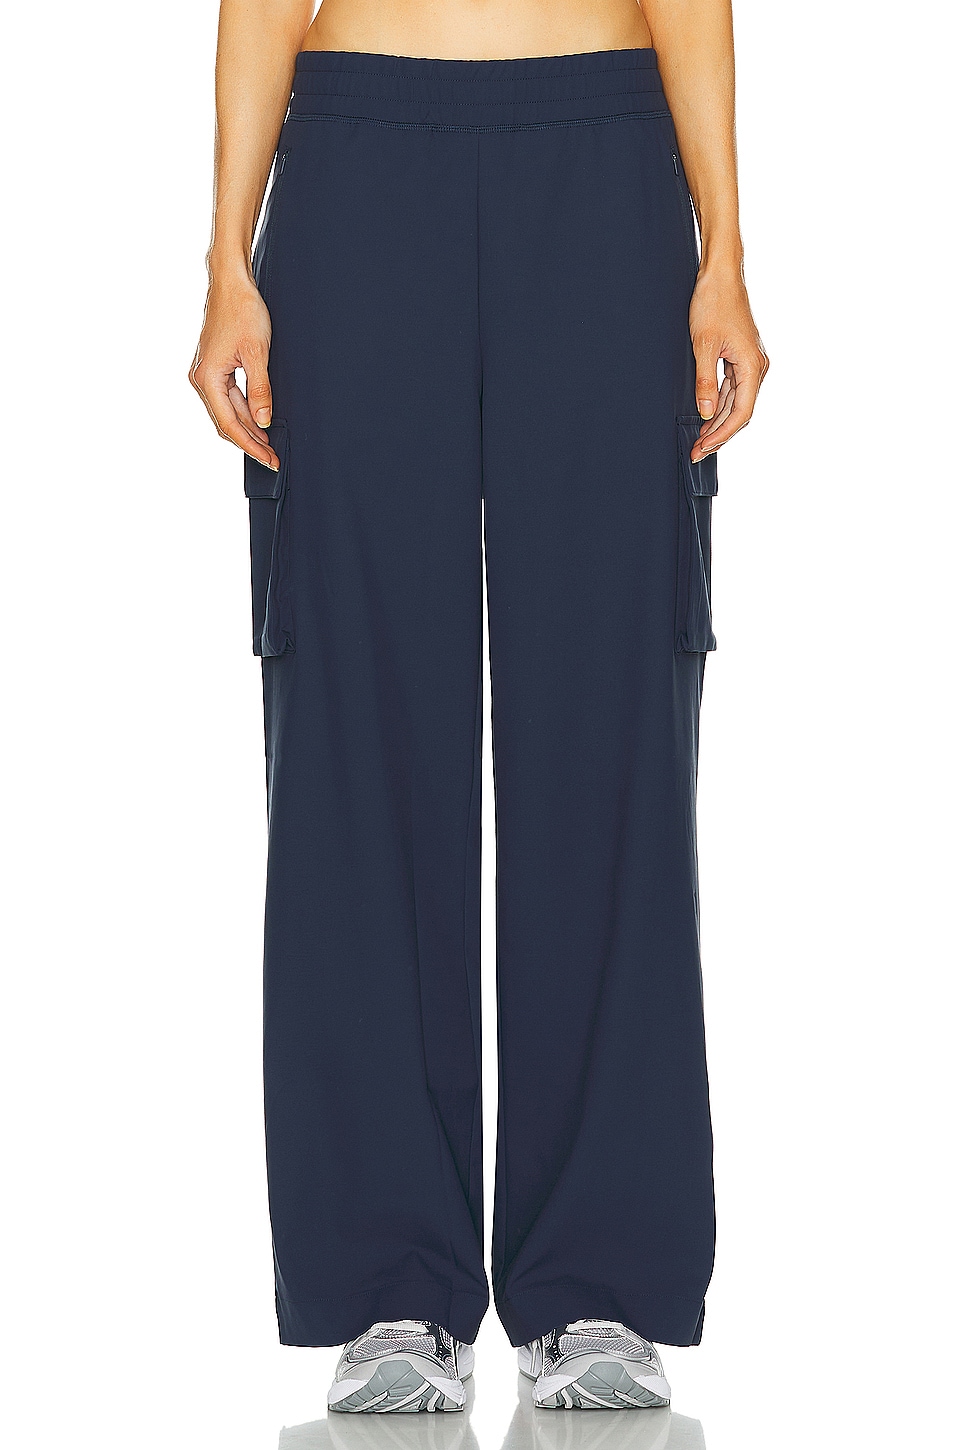 City Chic Cargo Pant in Navy